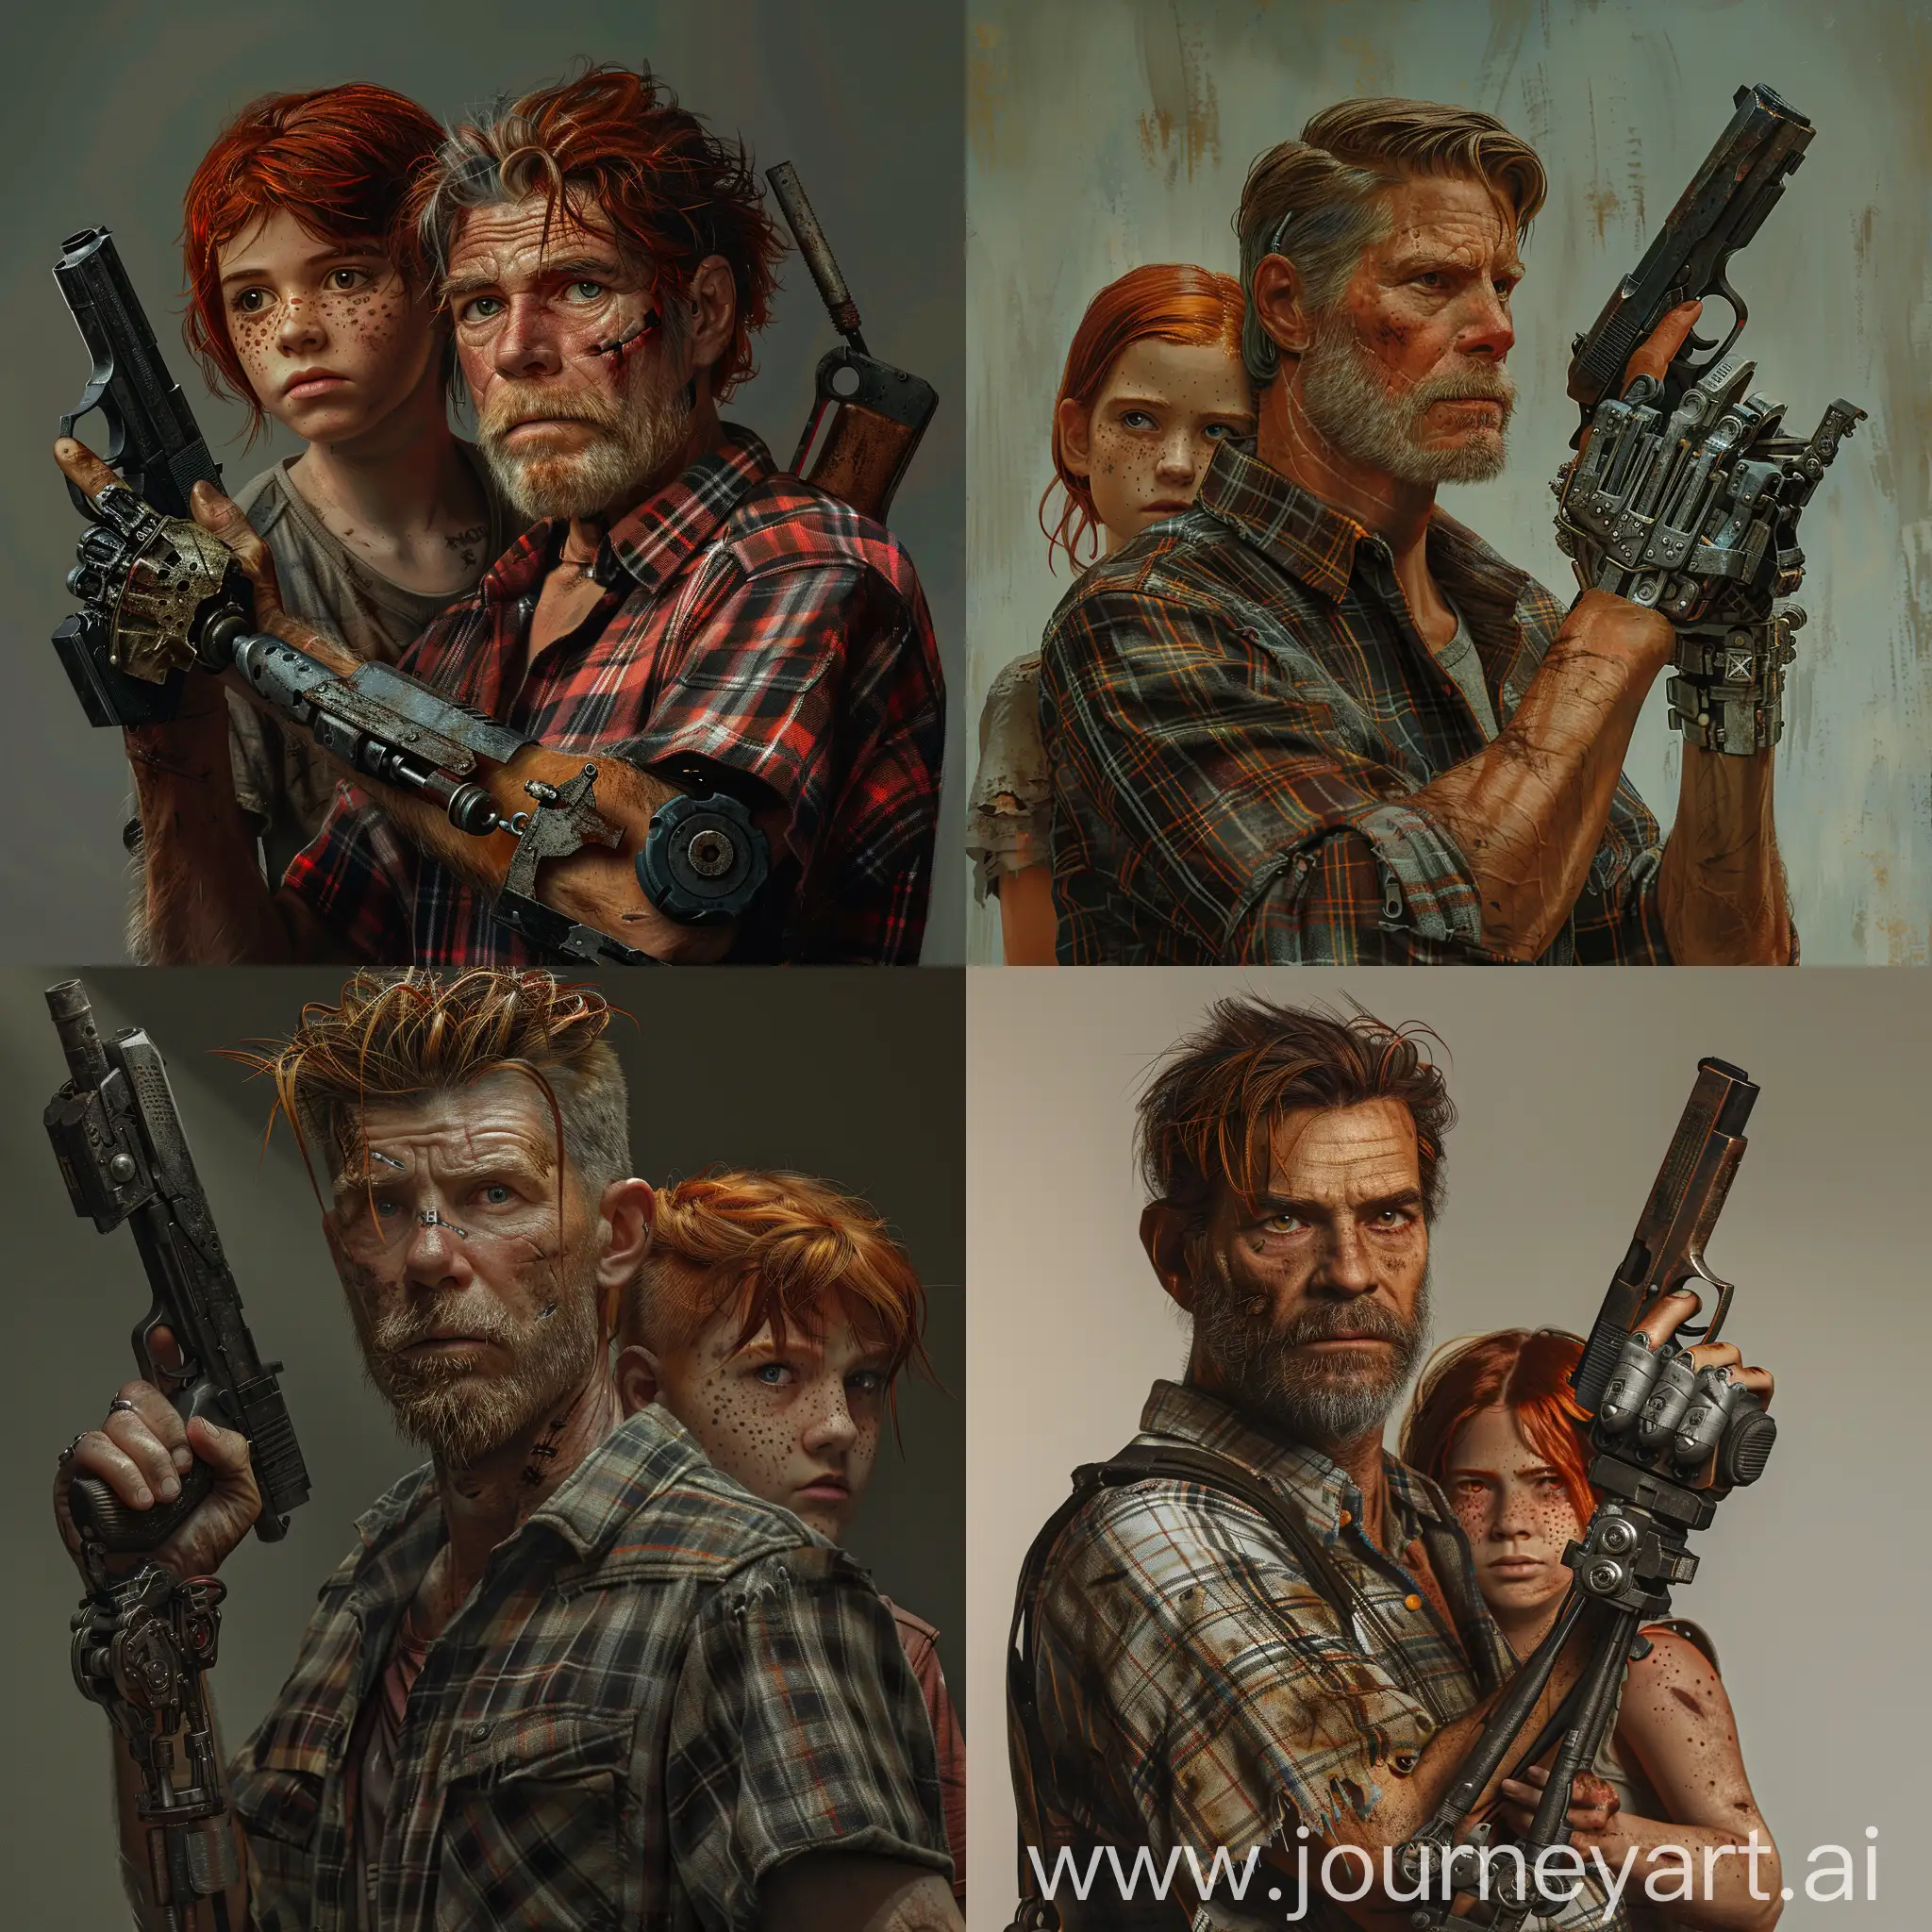 Two people, a brother and a sister. A man with a mechanical prosthesis of his right hand, medium-length hair with gray, a small beard, holds a pistol in his left hand. He's wearing an old plaid shirt. A red-haired girl with a short hairstyle, freckles on her face hides behind her brother. The style of the post-apocalypse. High quality, lots of details, 4k

